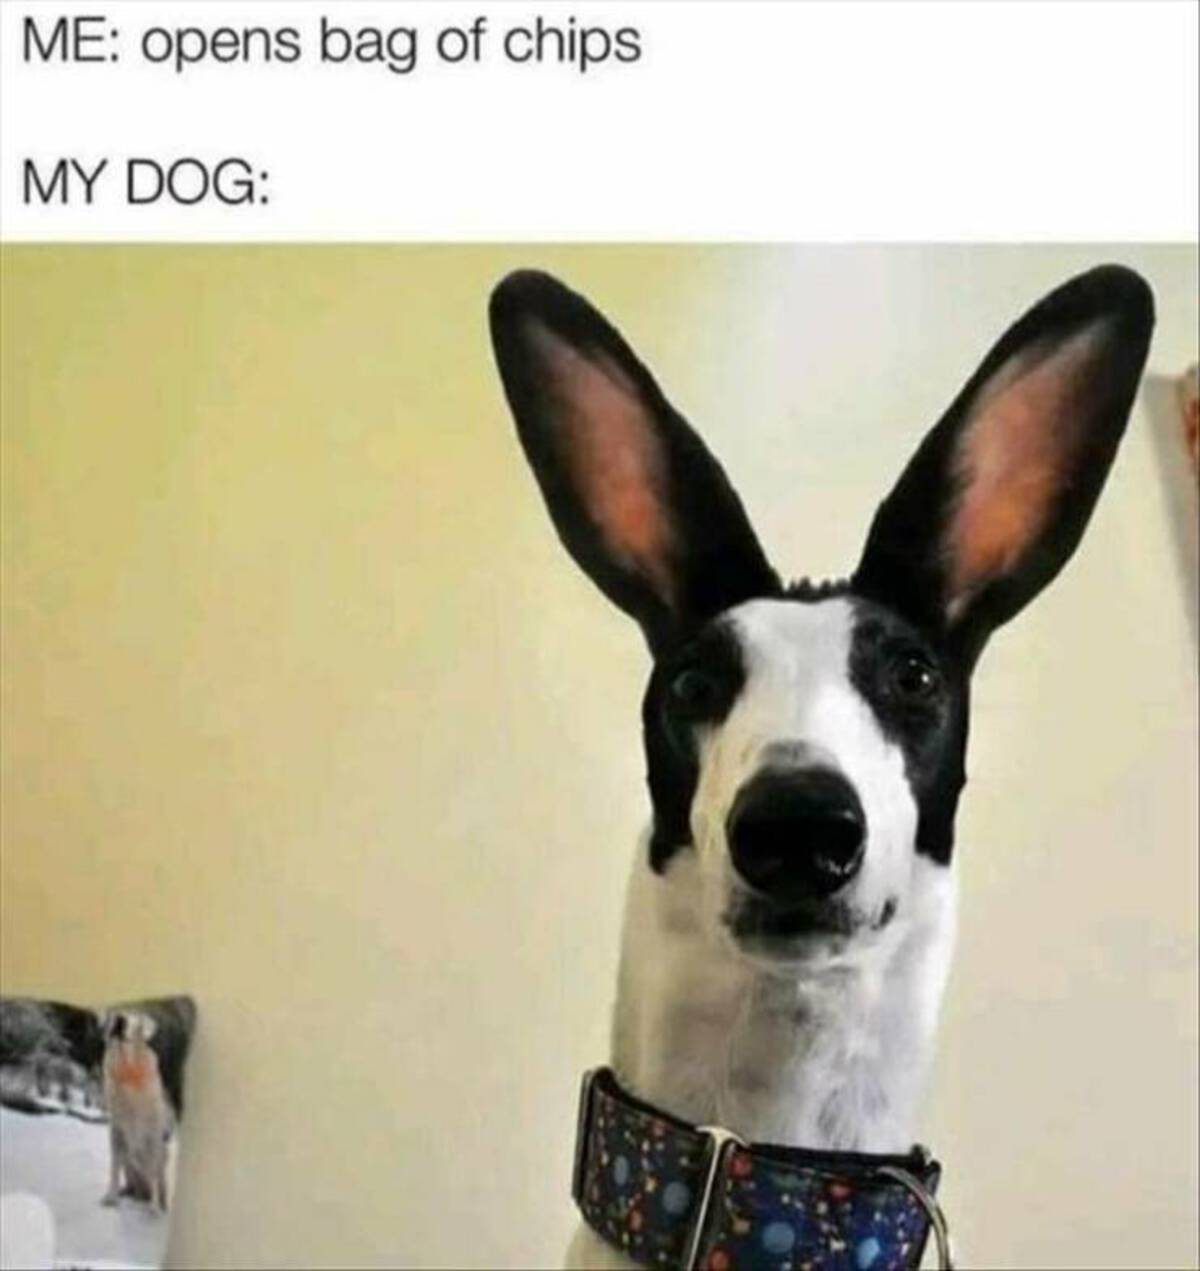 Dog - Me opens bag of chips. My Dog